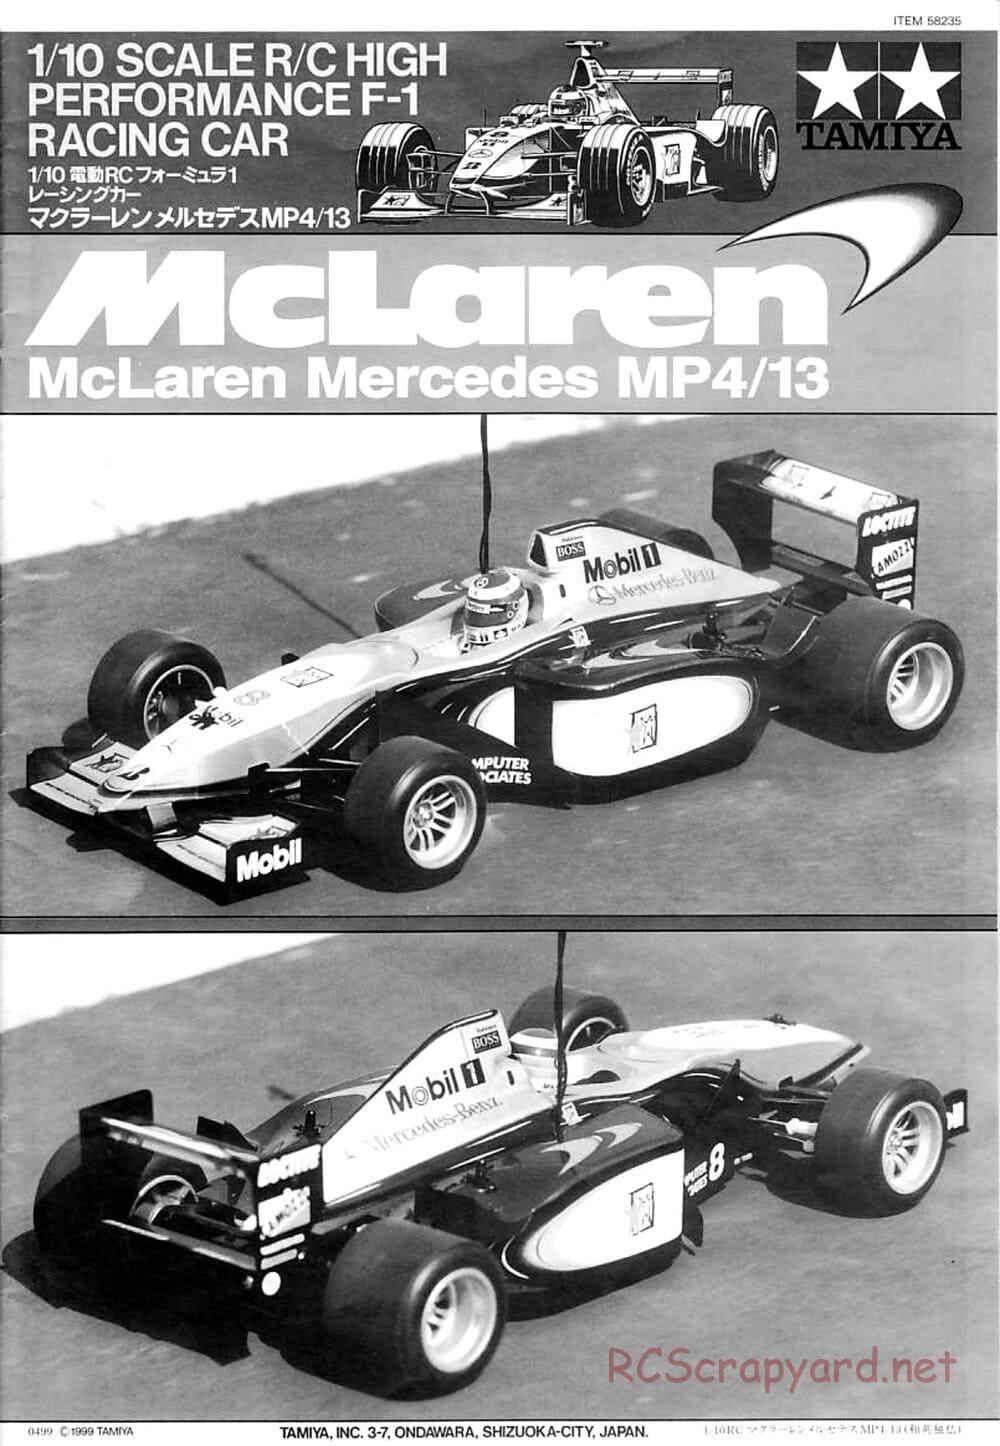 Tamiya - McLaren Mercedes MP4/13 - F103RS Chassis - Manual - Page 1